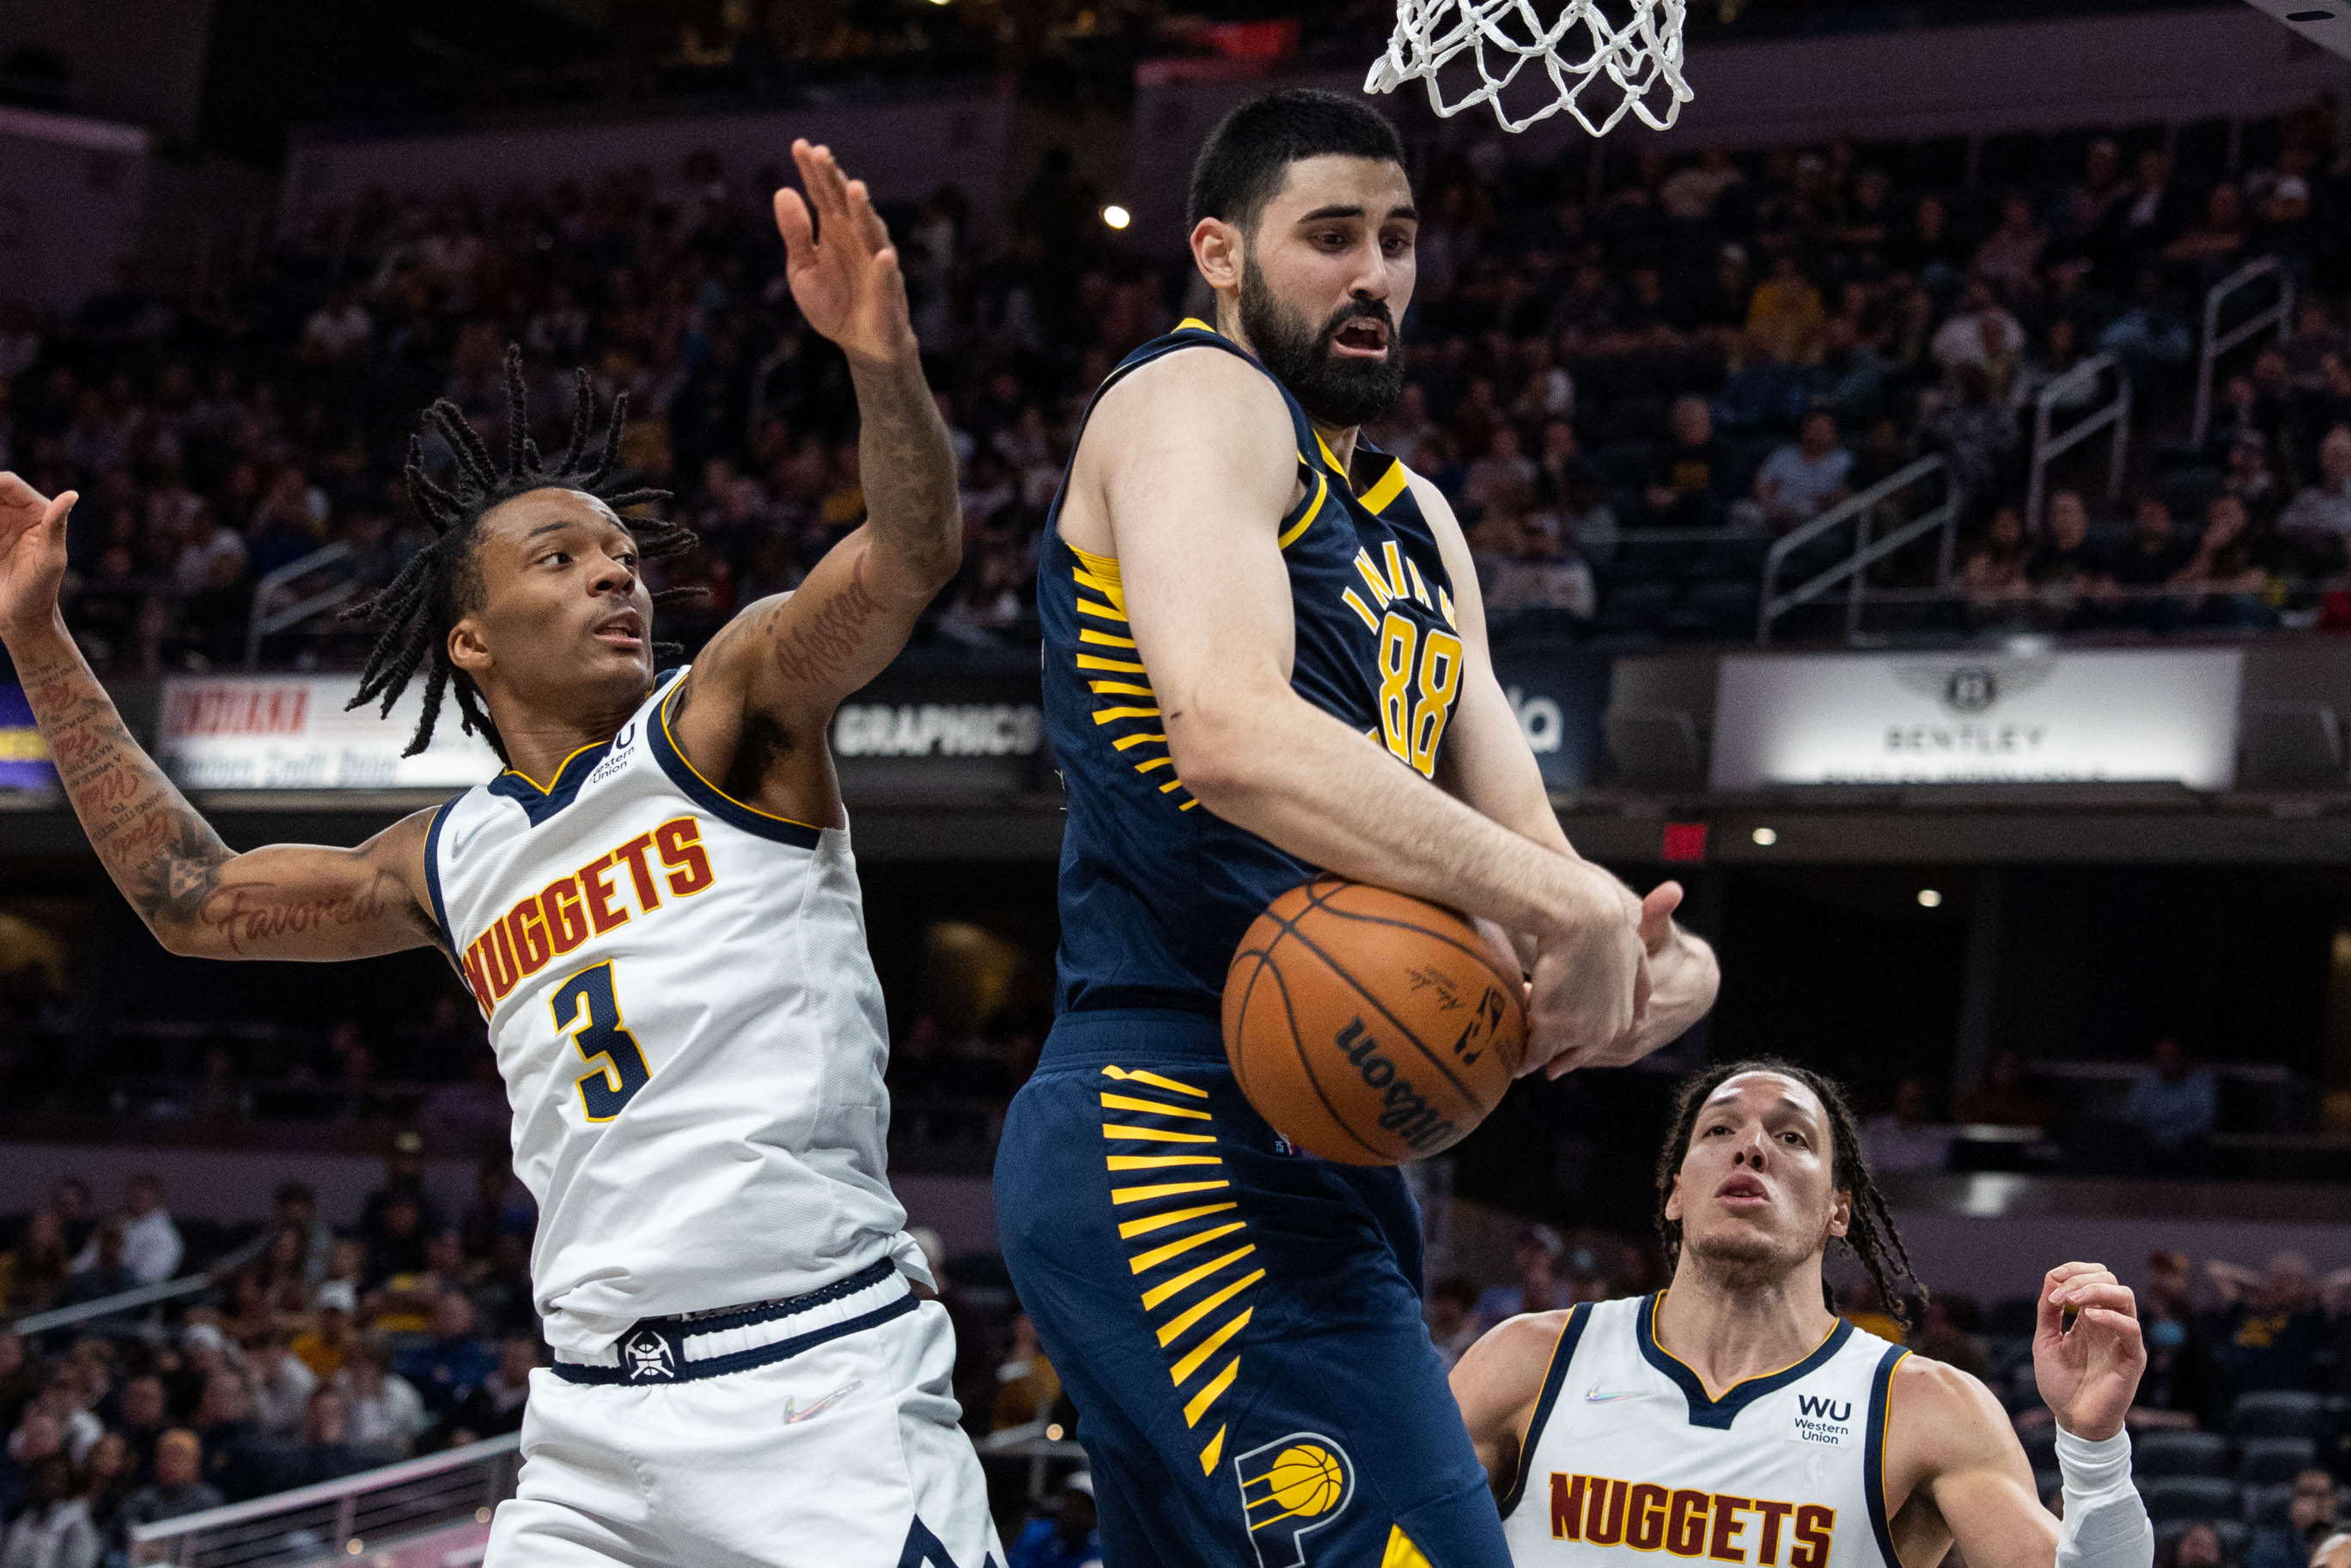 Indiana Pacers game preview: Pacers host former MVP Nikola Jokic in Indianapolis